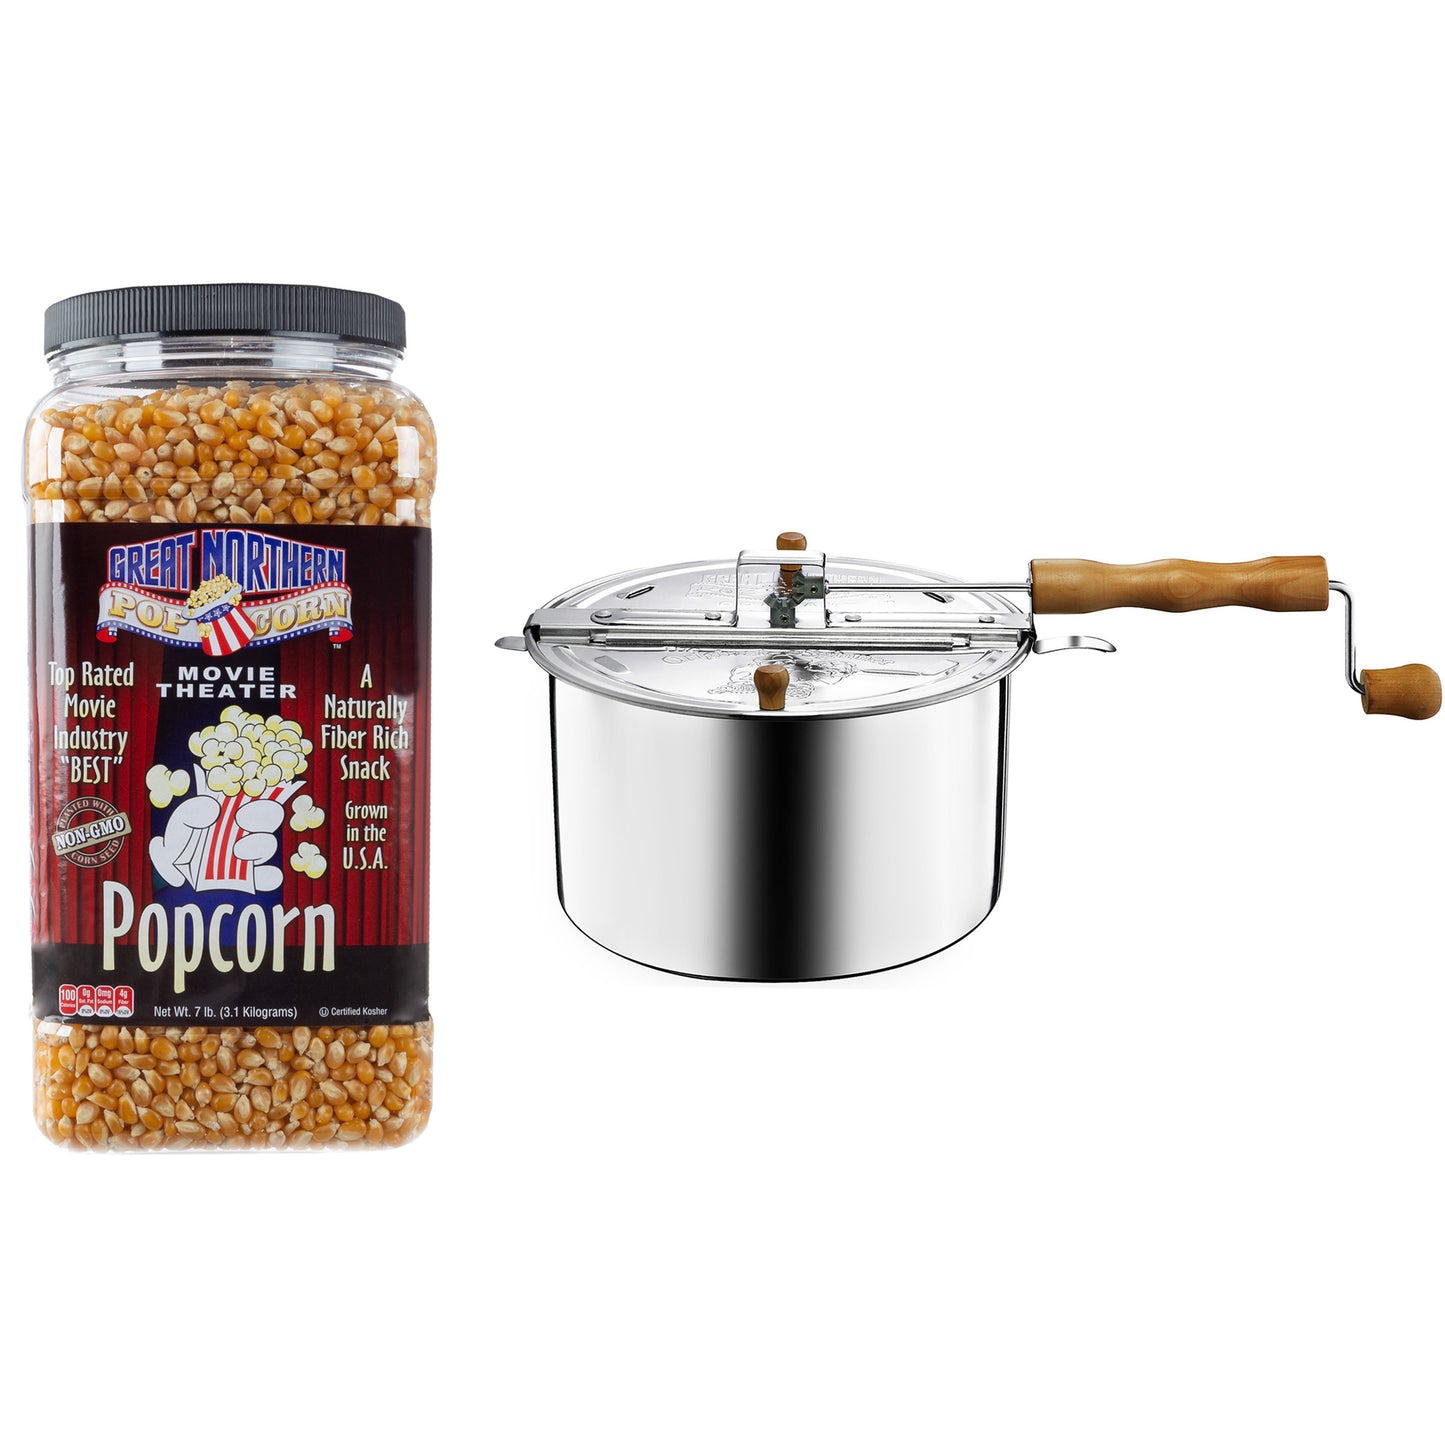 6.5 Quart Stainless Steel Stovetop Popcorn Maker with 7 Pounds of Popcorn Kernels